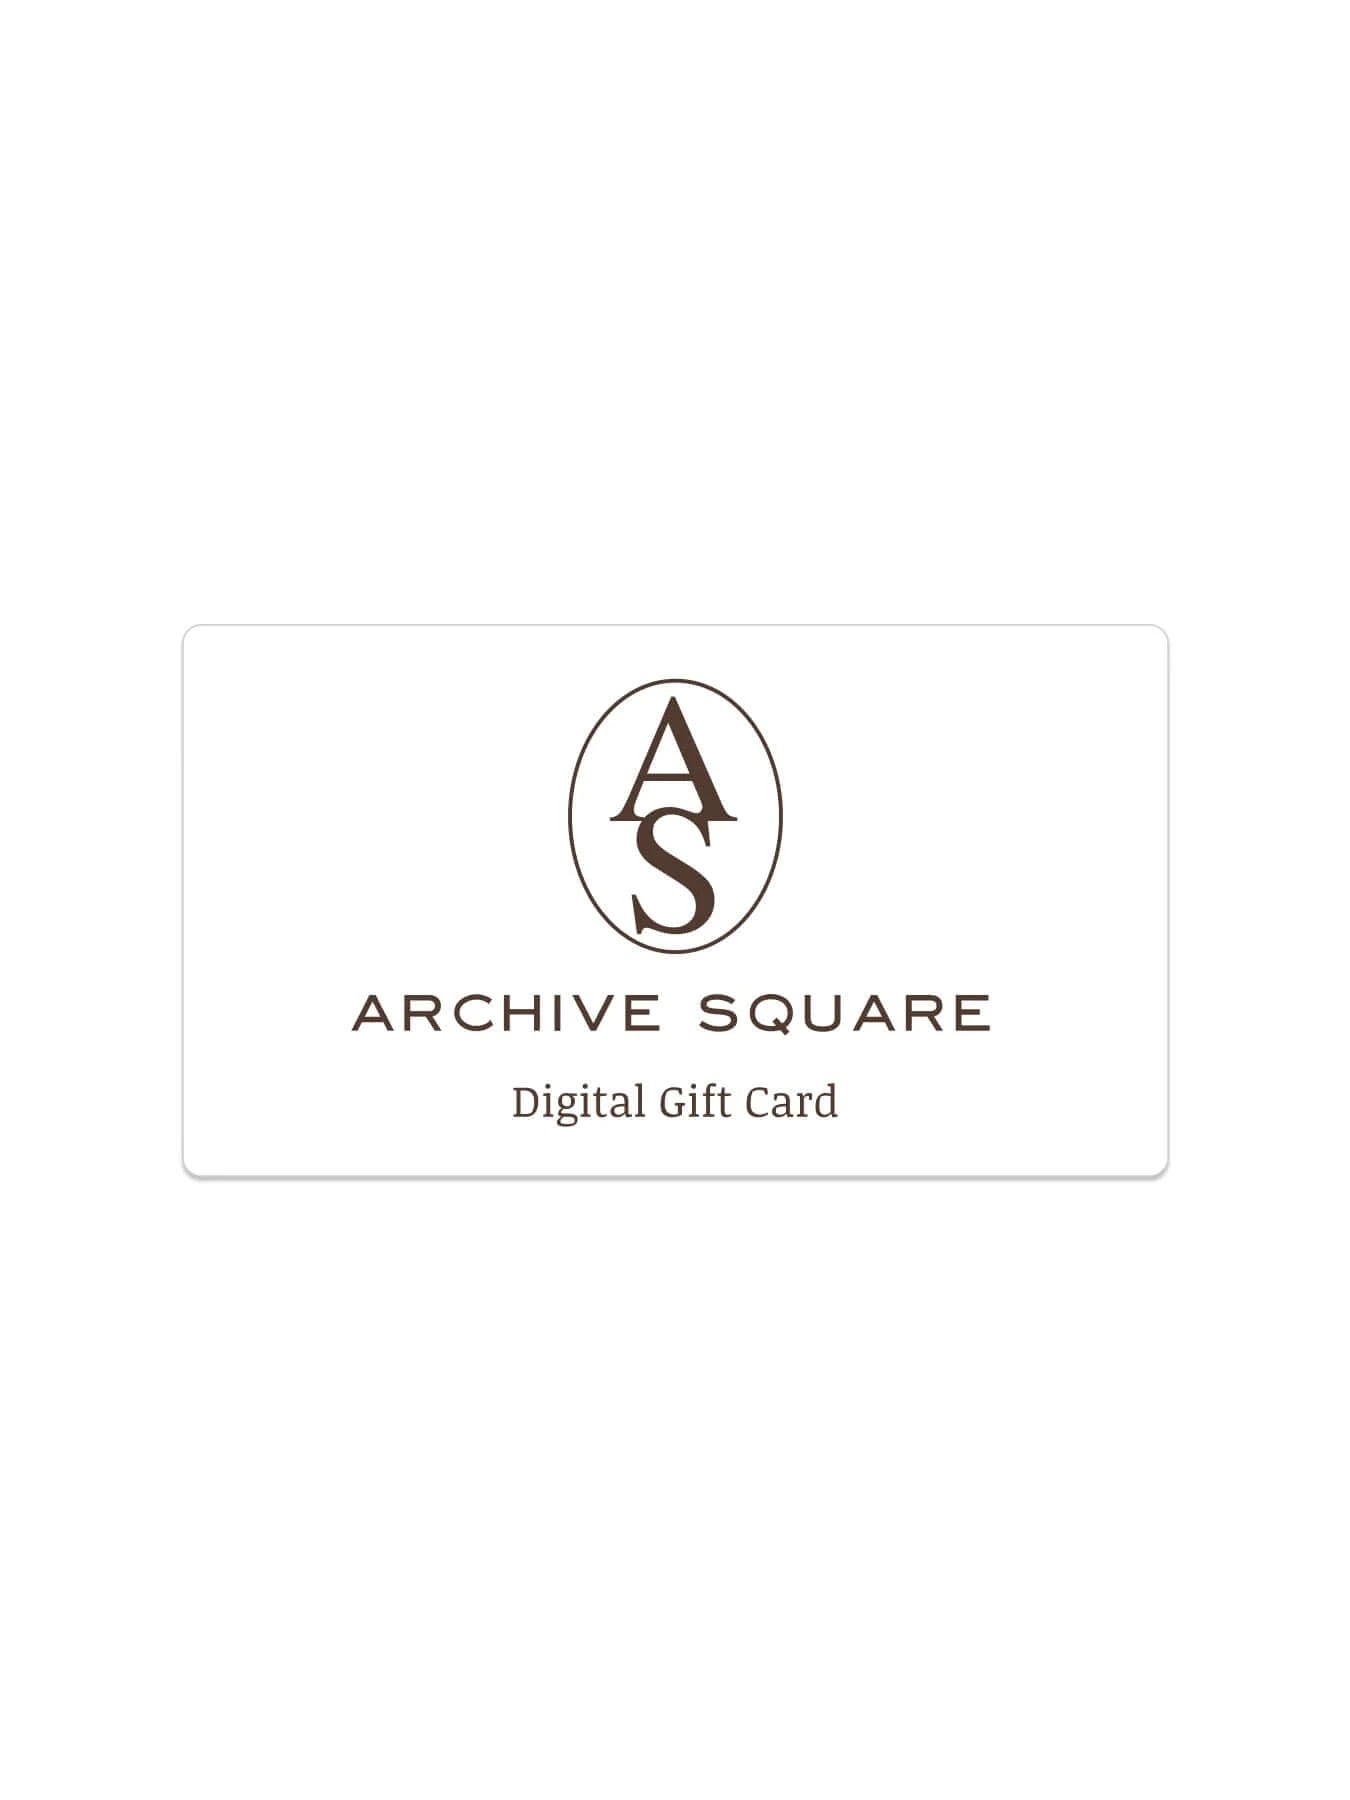 Archive Square Digital Gift Card